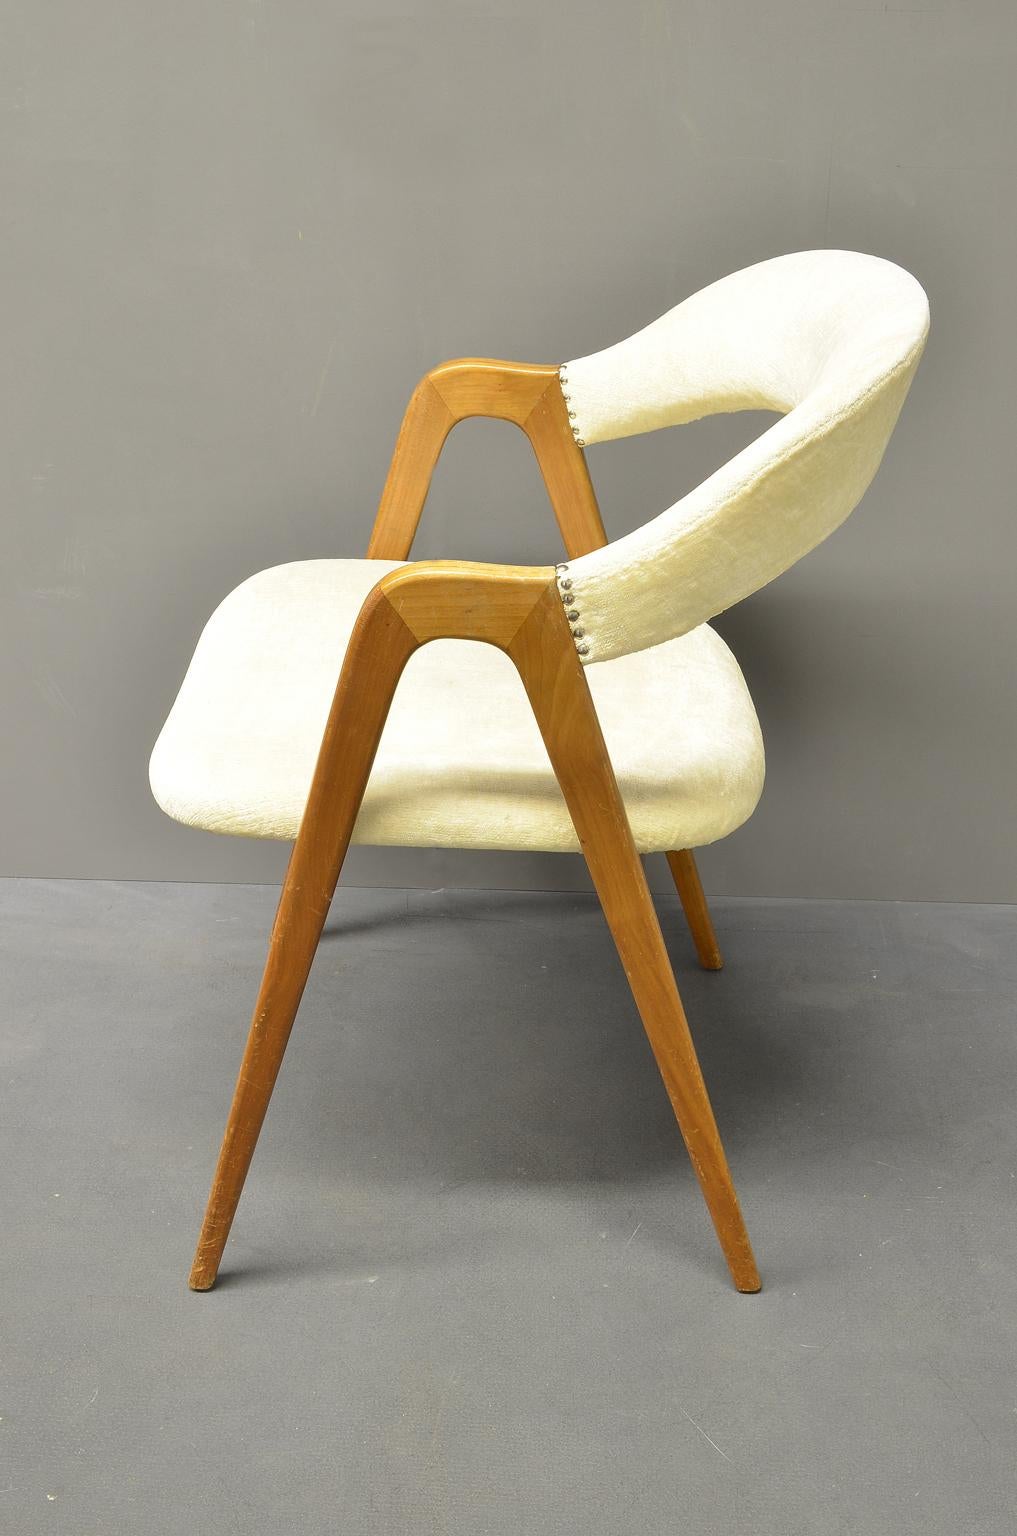 This armchair or desk chair produced by WK Möbel in the 1960s, Germany.